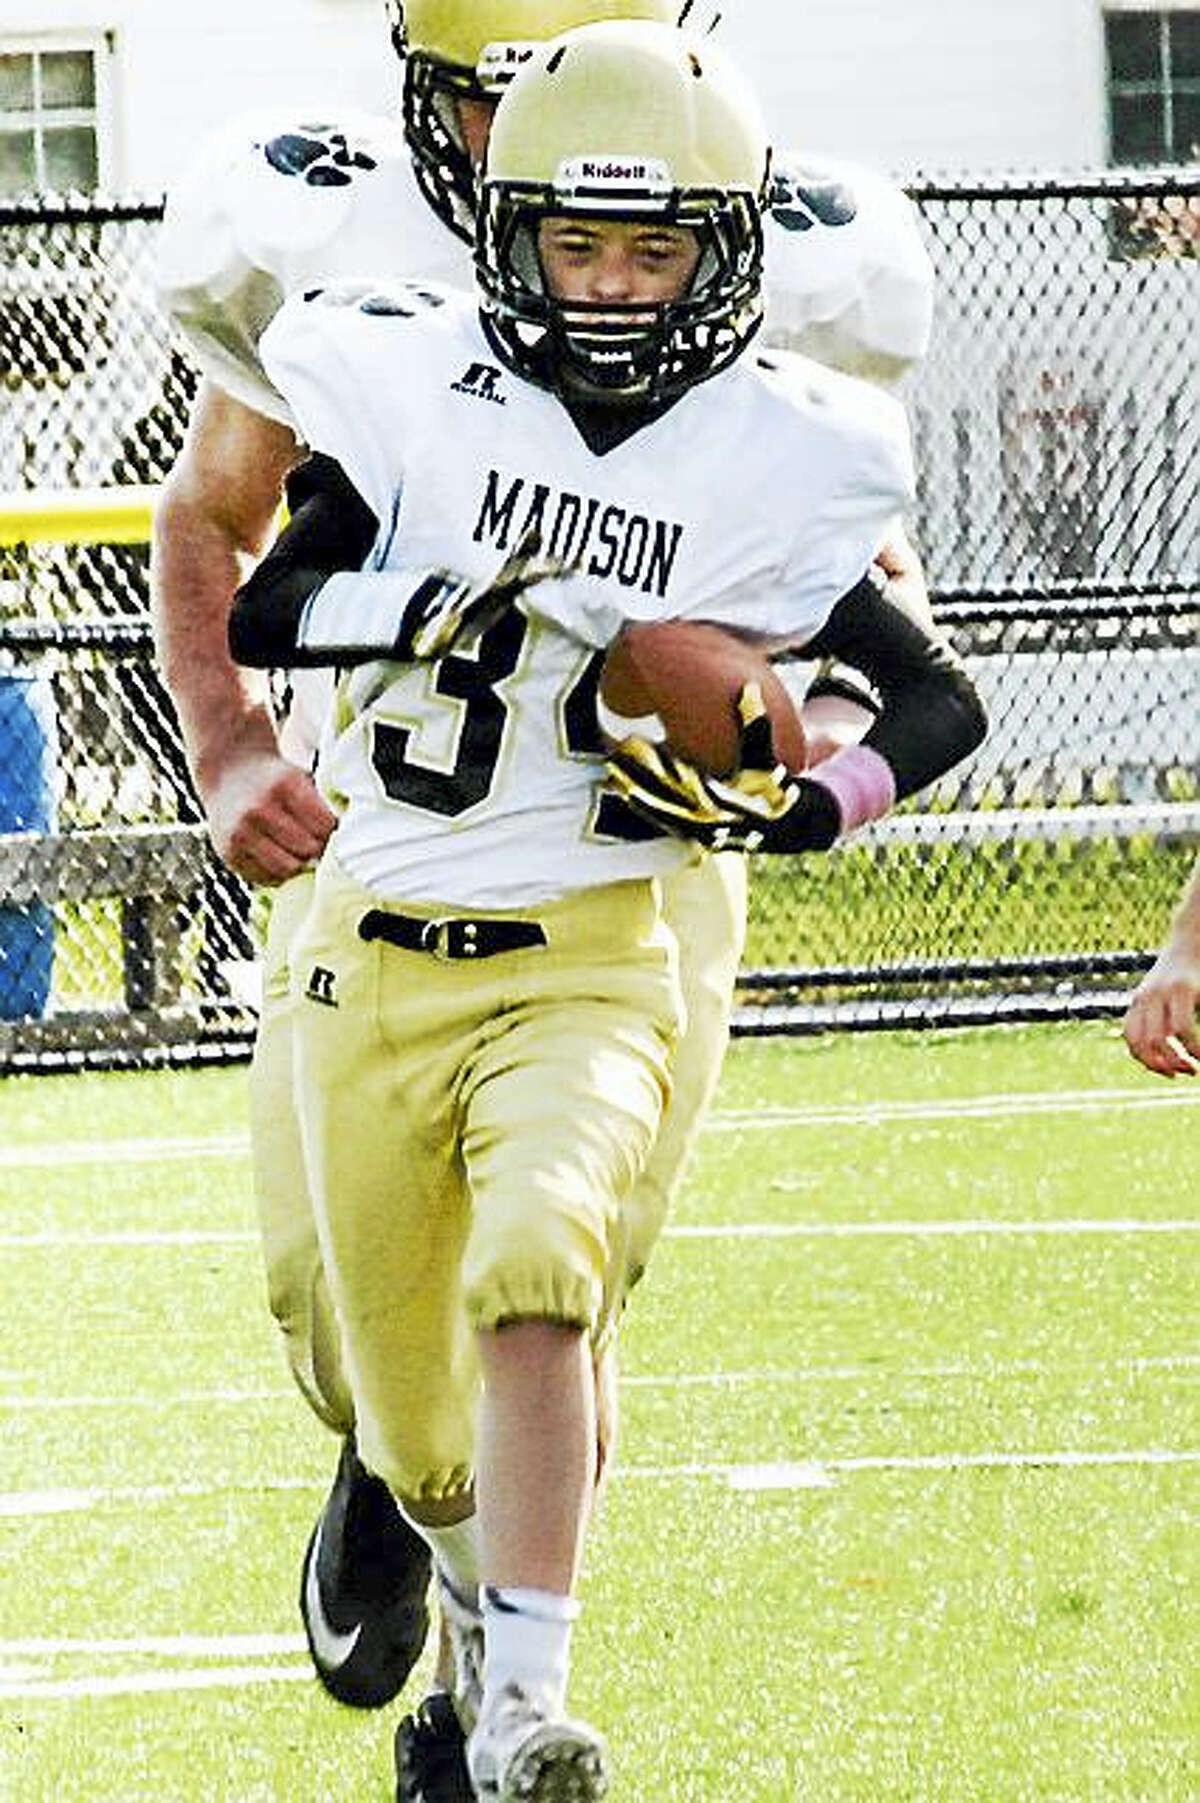 Willi Wilson of Madison runs a touchdown at a recent Sunday game.